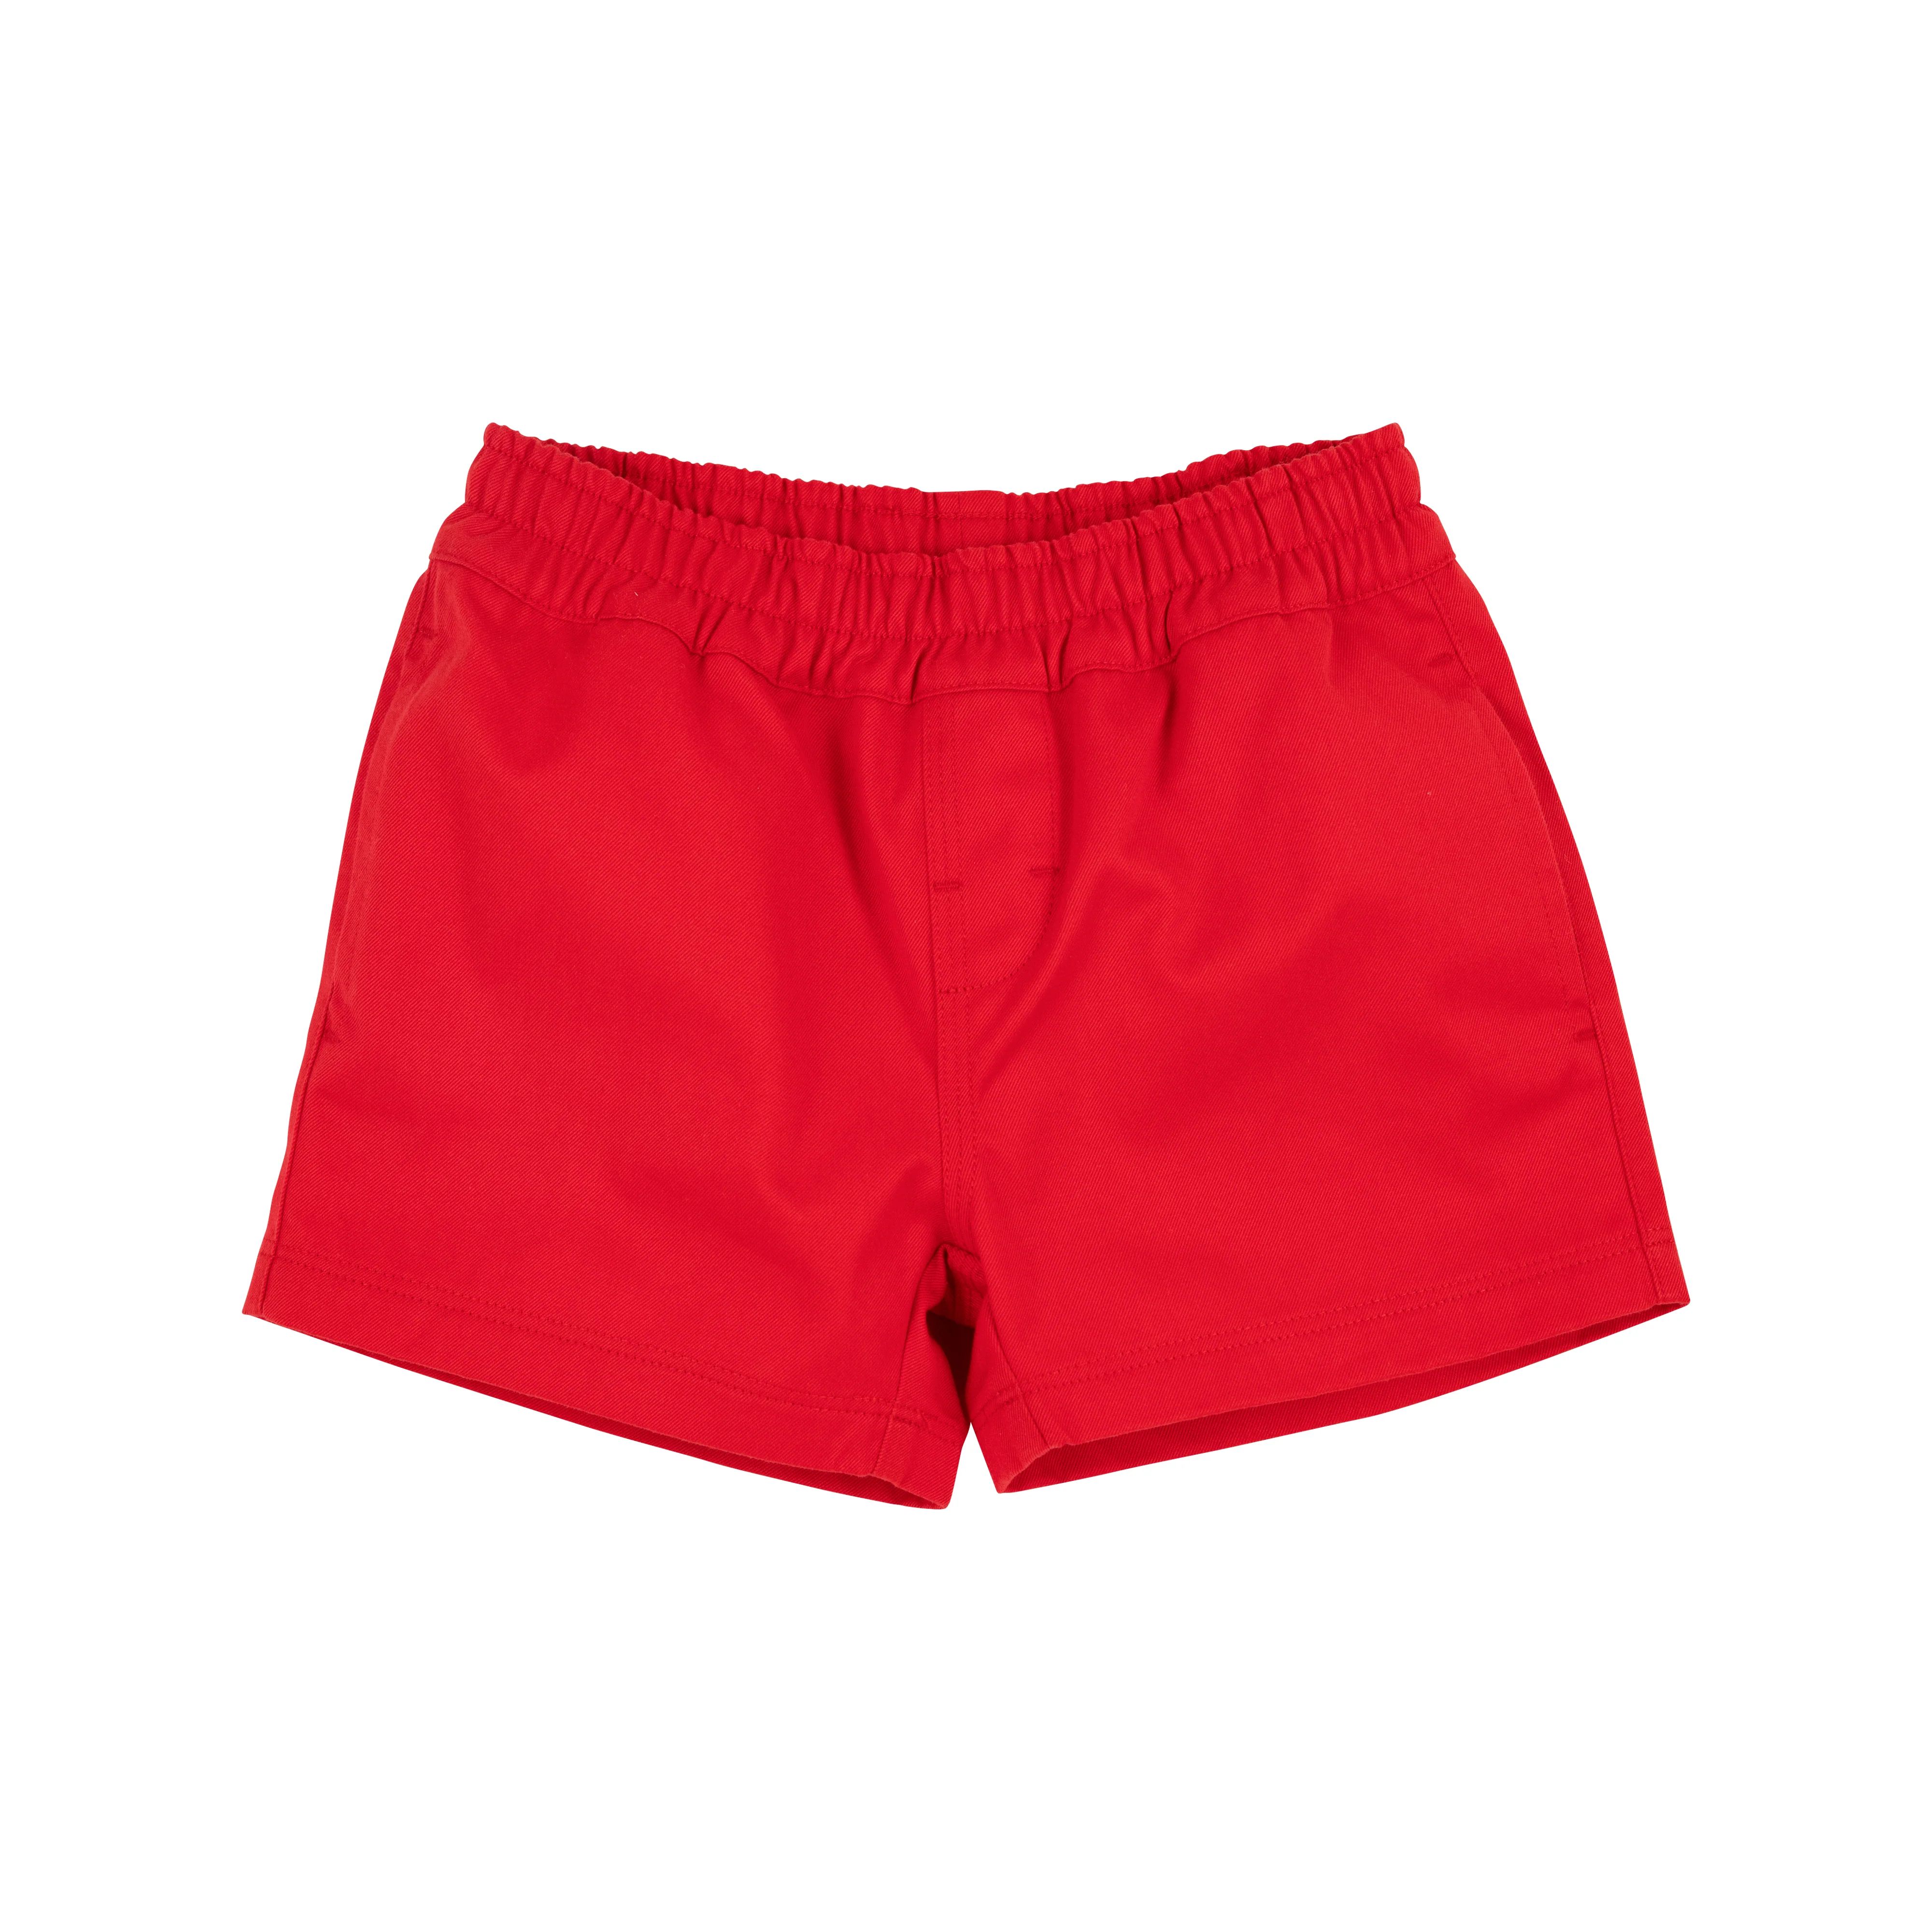 Sheffield Shorts - Richmond Red with Multicolor Stork | The Beaufort Bonnet Company